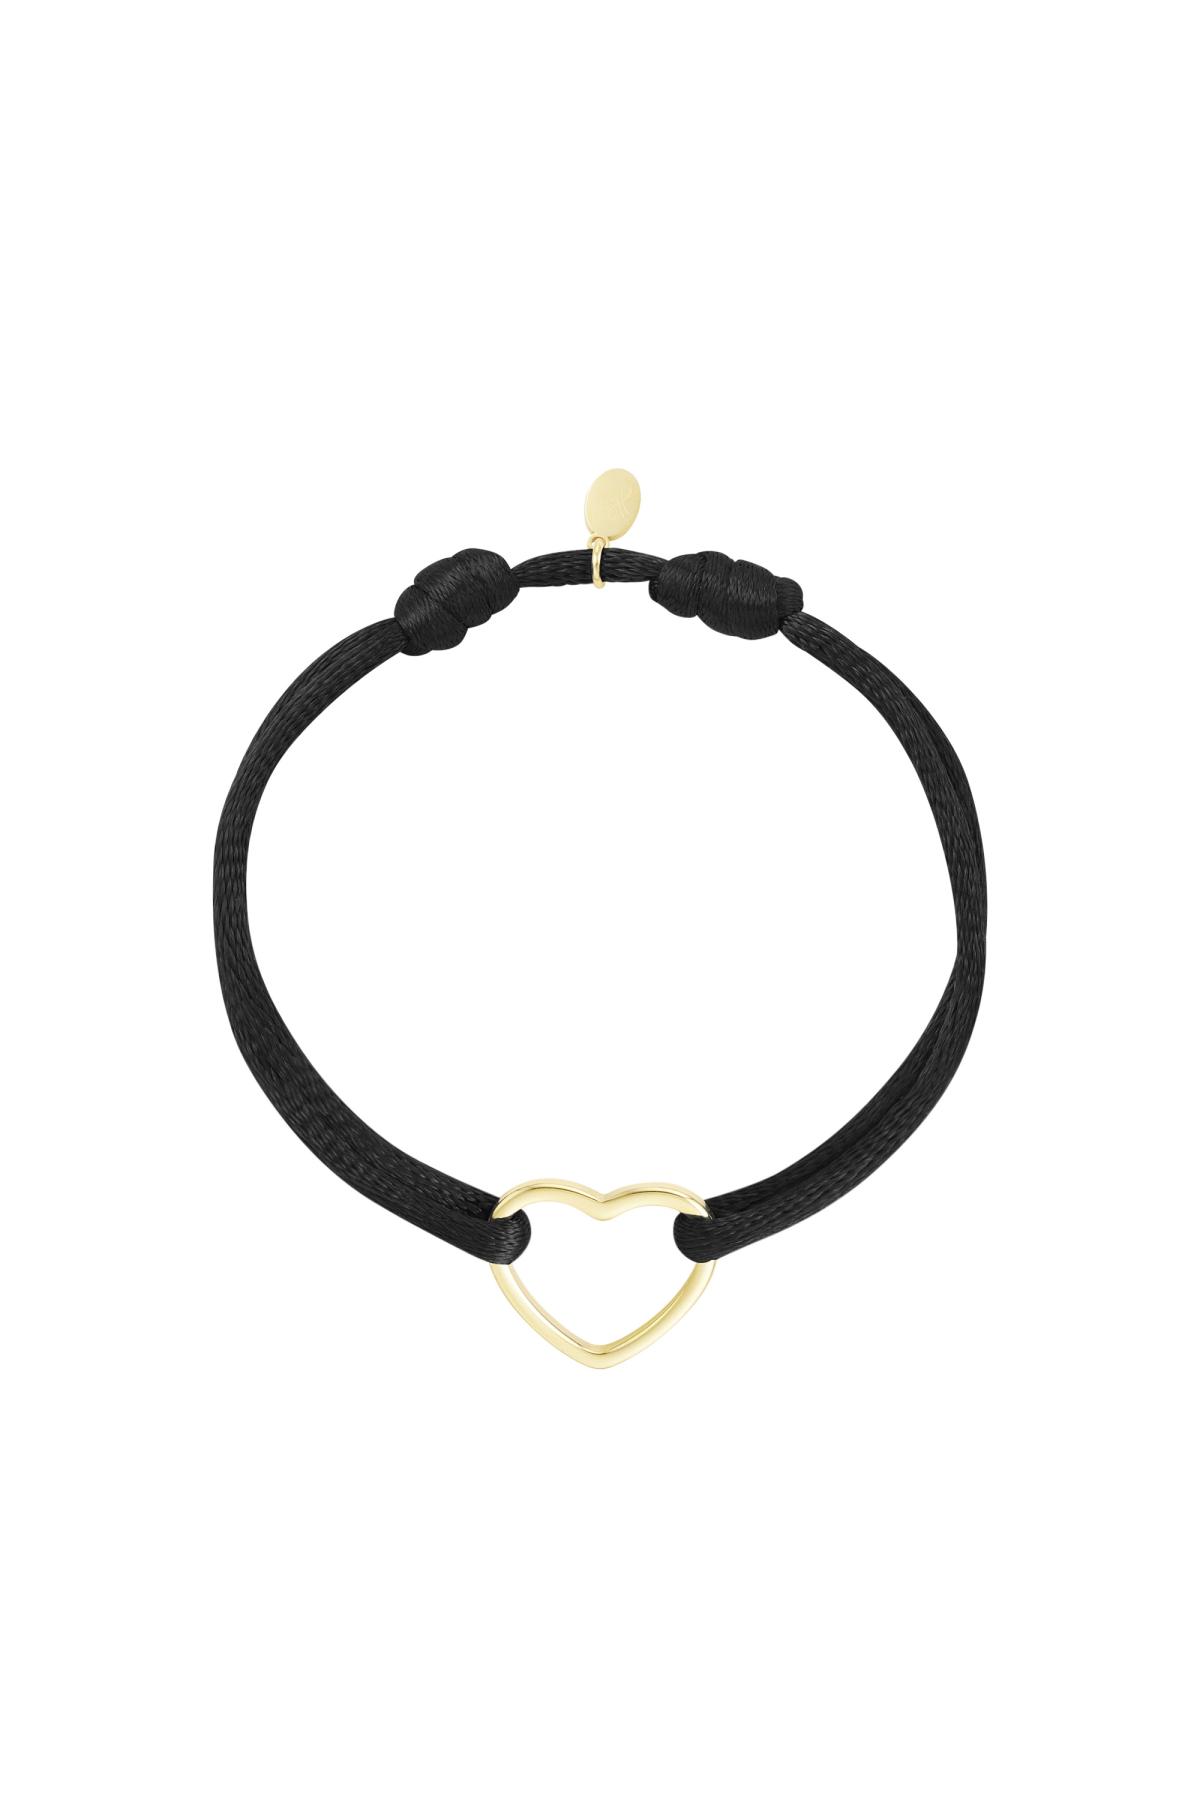 Bracciale in tessuto cuore Black & Gold Stainless Steel 